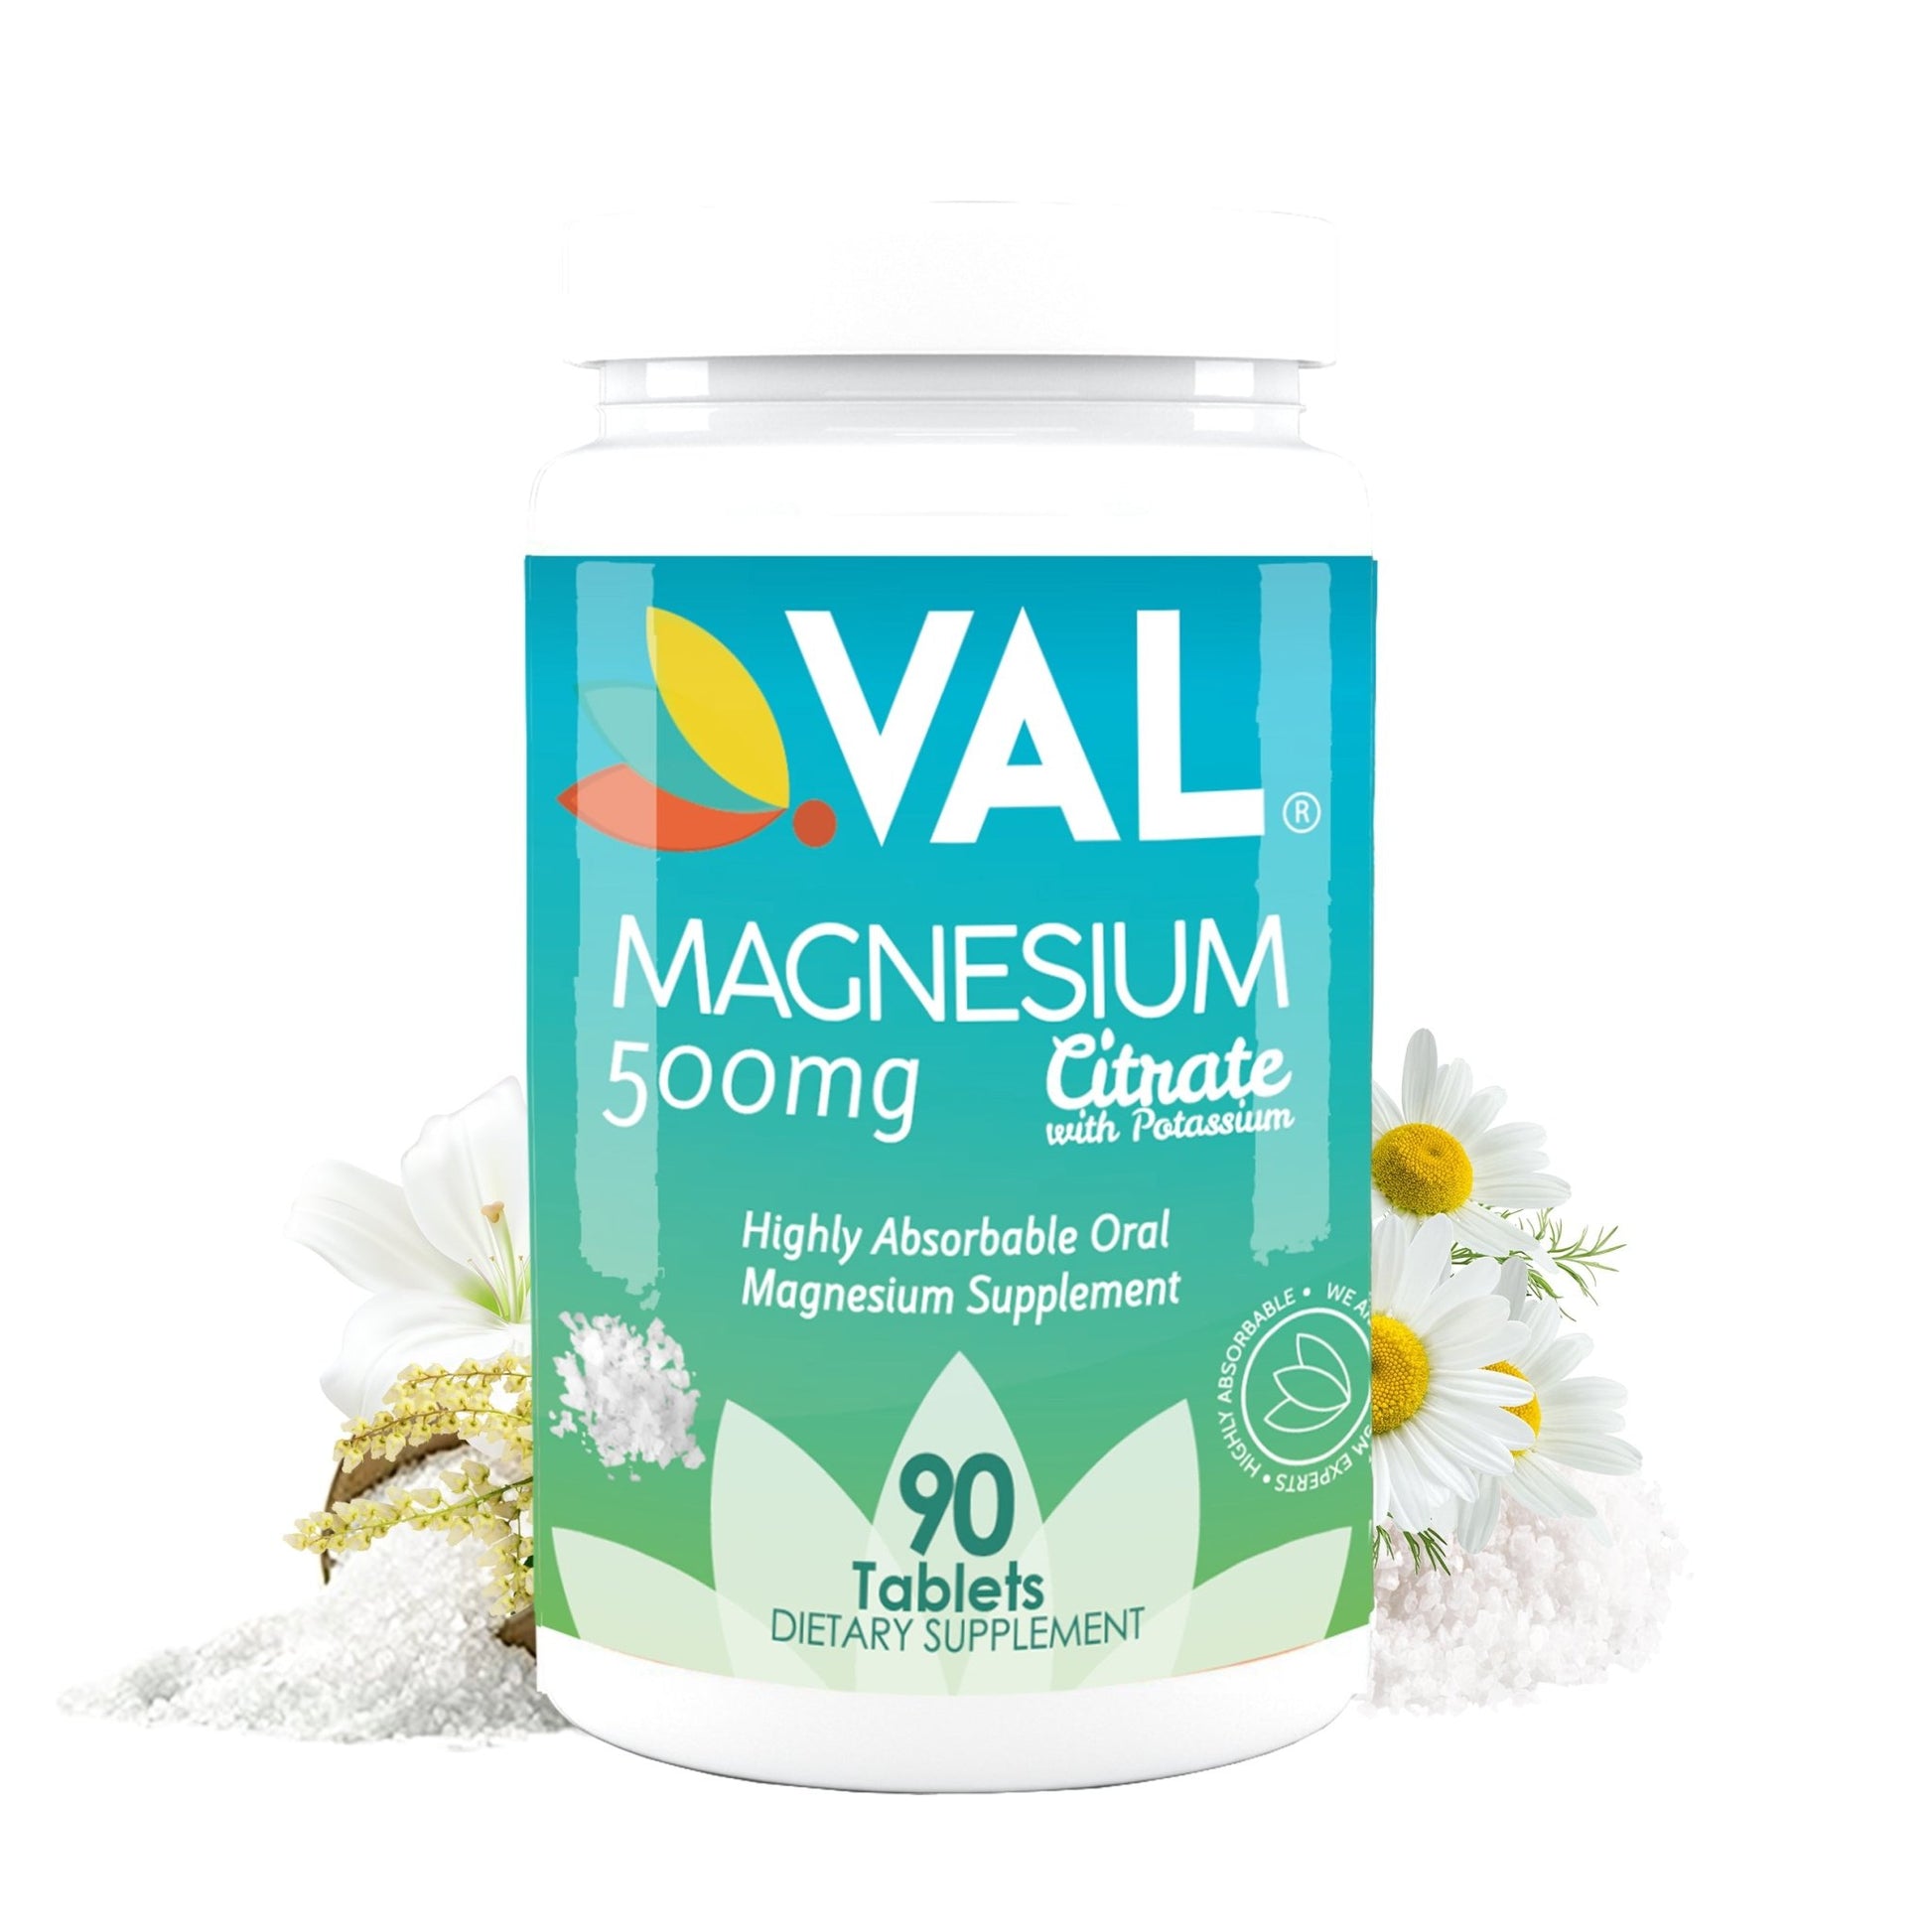 VAL Magnesium Citrate 500mg with Potassium - Muscle Relaxation, Sleep, Support Calm, Energy Support, Healthy Magnesium Levels - 90 Tablets - Val Supplements